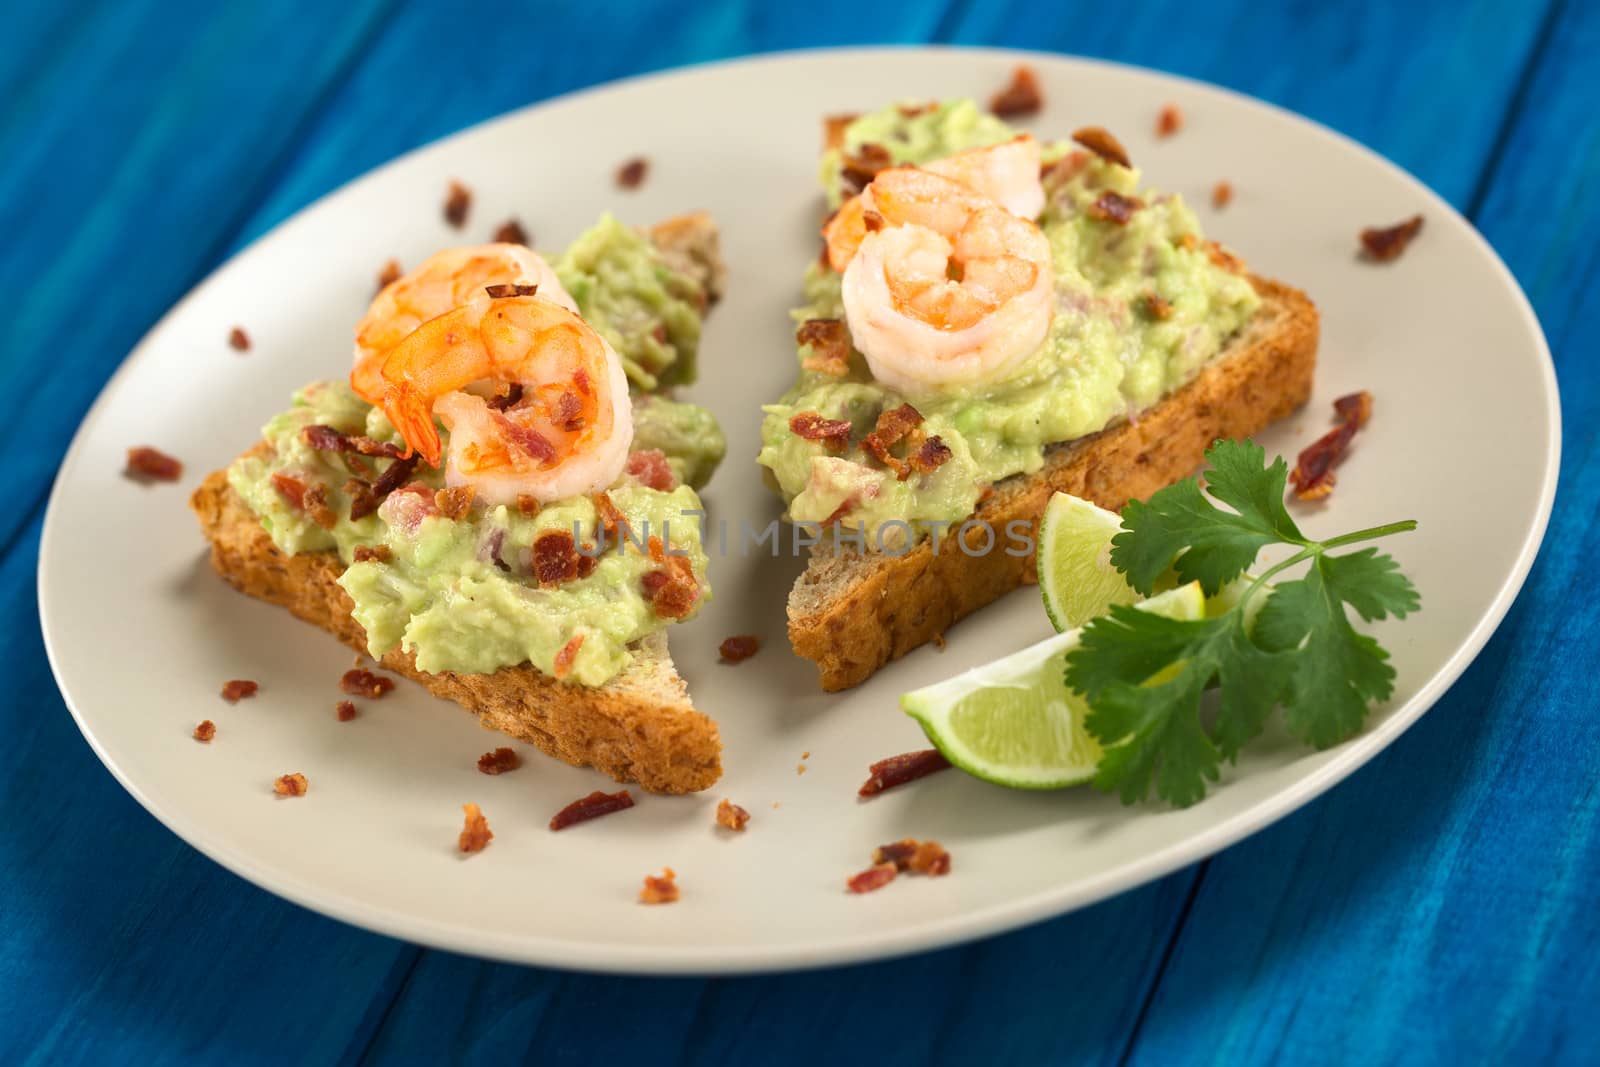 Wholegrain toast bread slices with guacamole, fried shrimp and fried bacon pieces served on plate on blue wood (Selective Focus, Focus on the front of the shrimp on the left bread and the front of the right bread) 